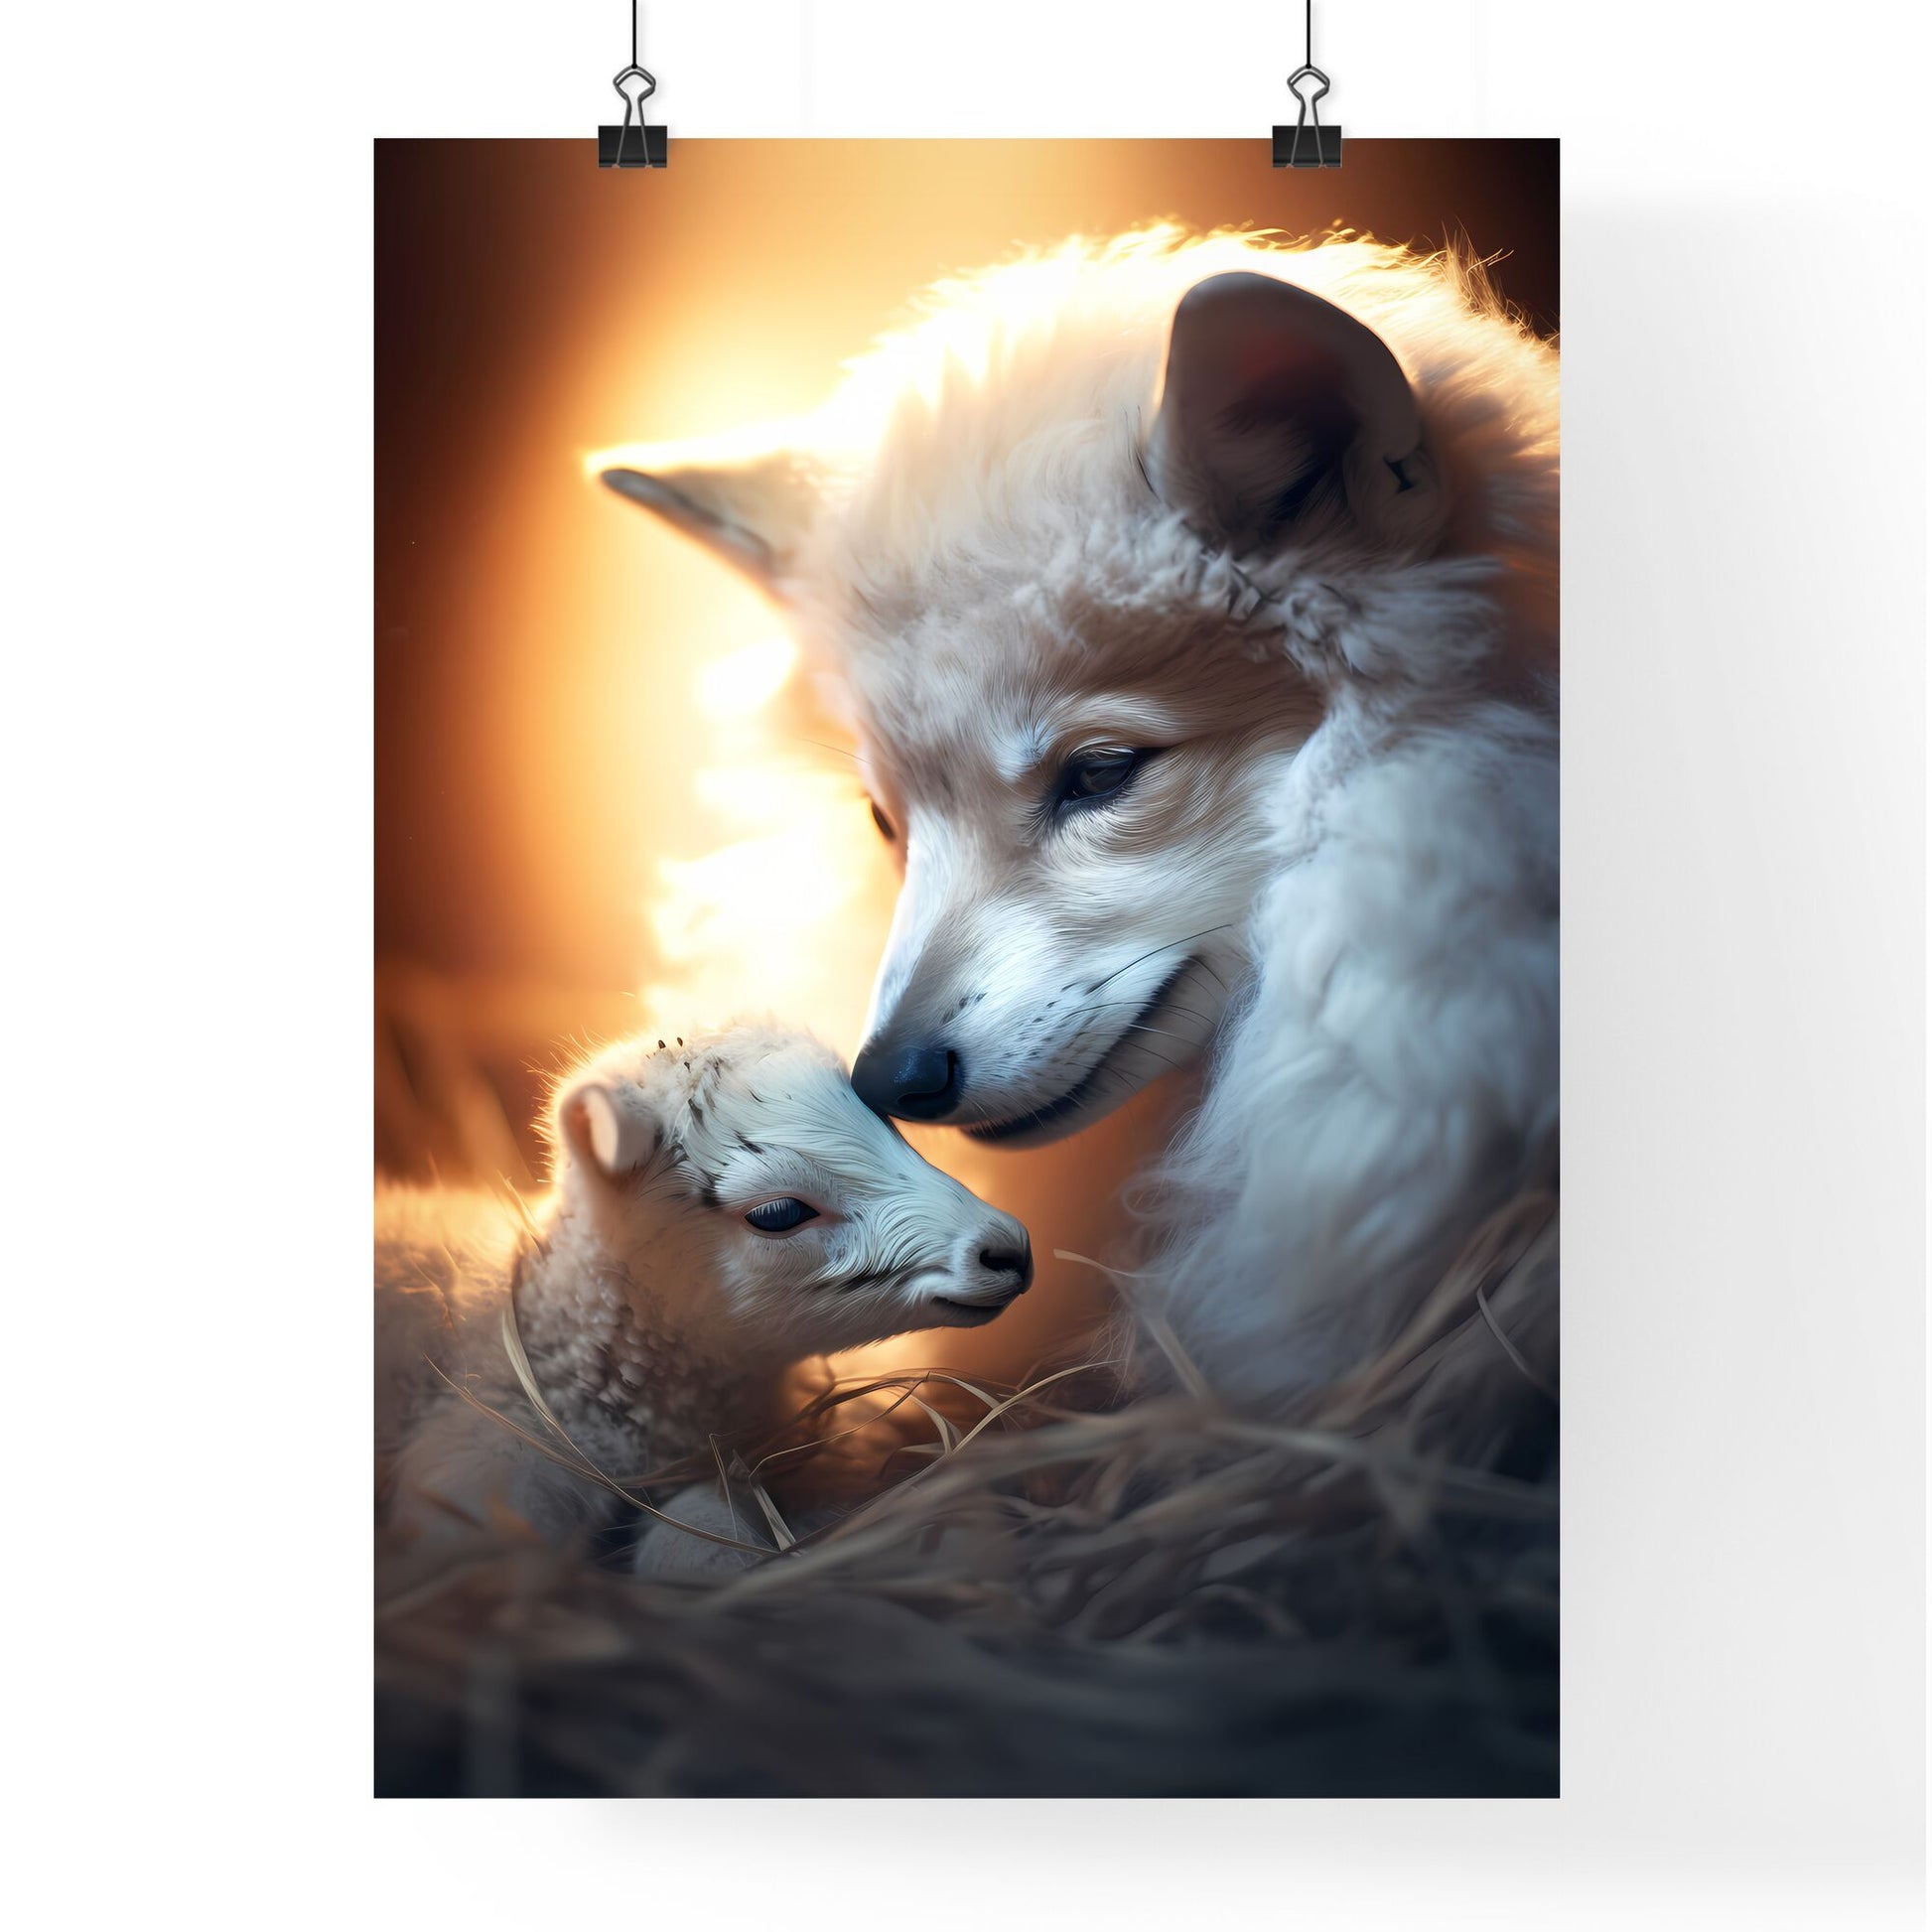 A Poster of A wolf is petting a lamb gently - A Dog And A Baby Animal Default Title